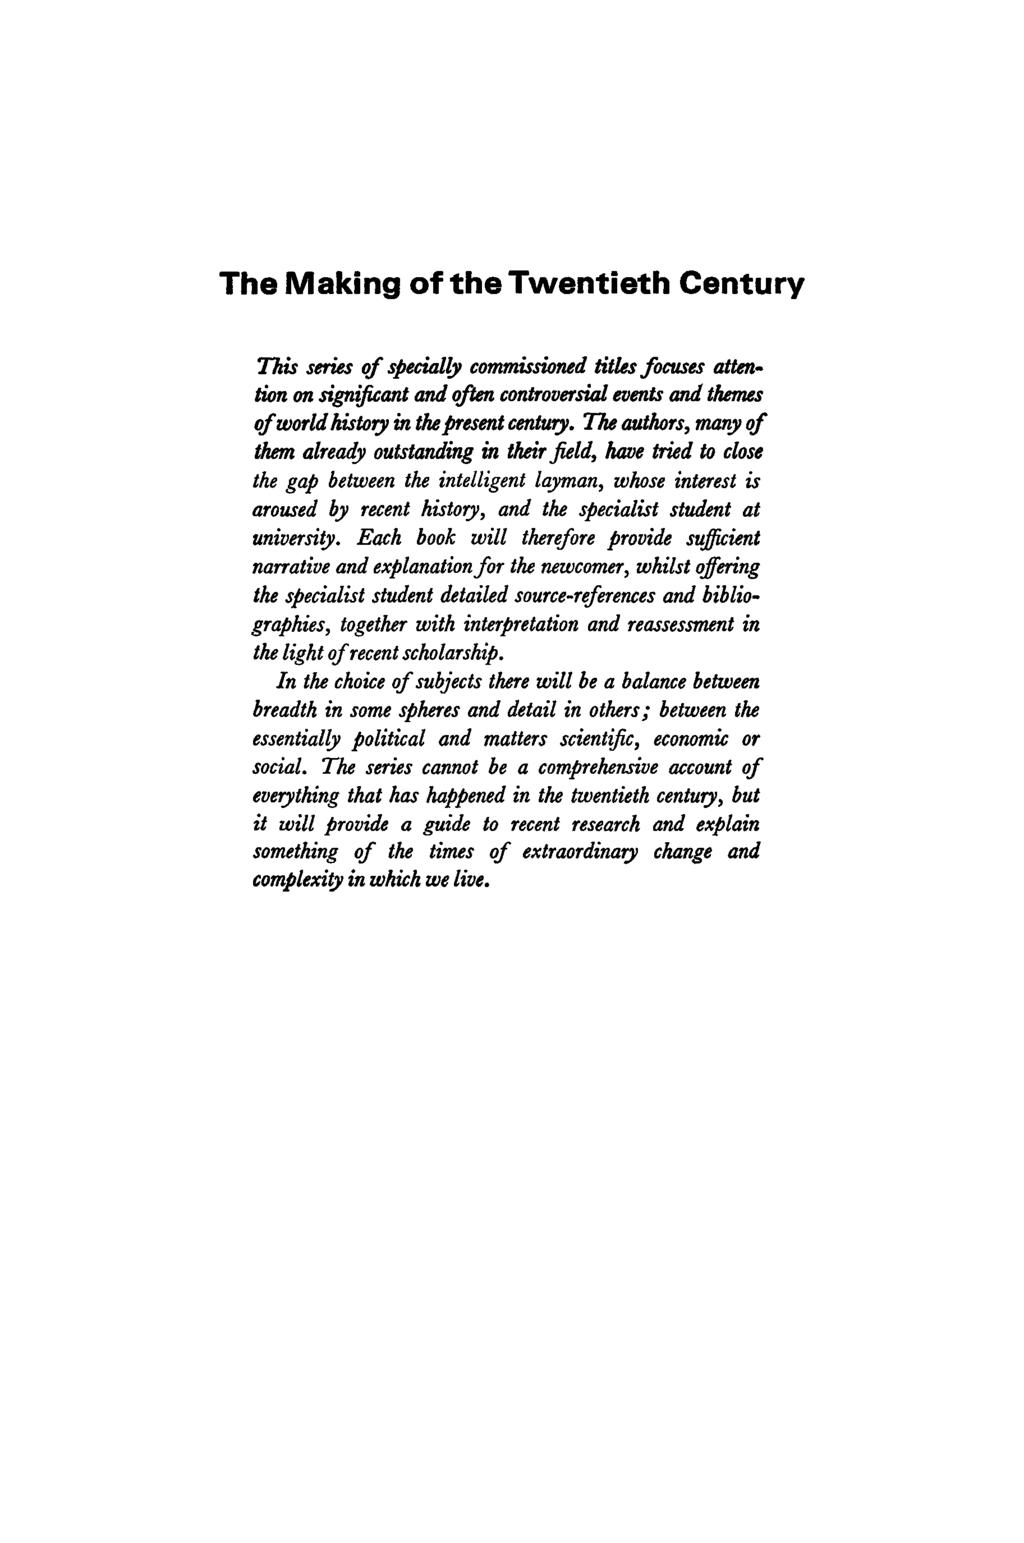 The Making of the Twentieth Century This series of specially commissioned titles focuses attention on significant and often controversial events and themes of world history in the present century.